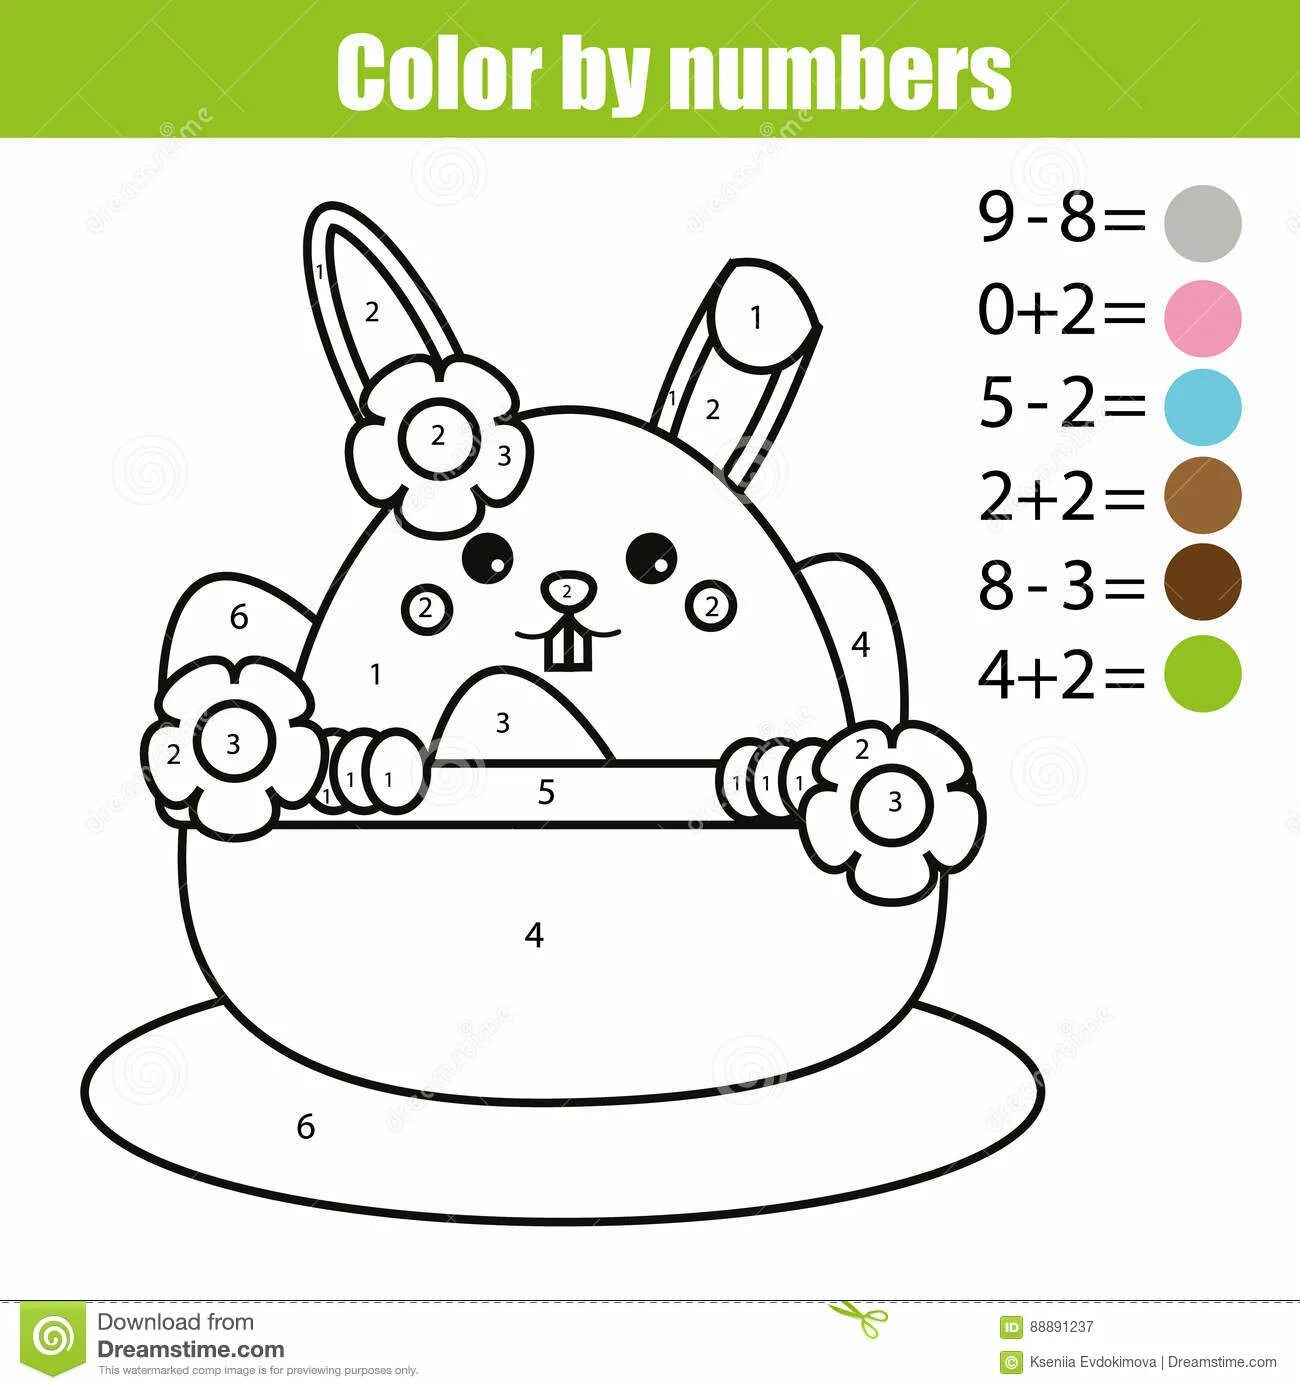 Flawless Bunny by Numbers coloring page